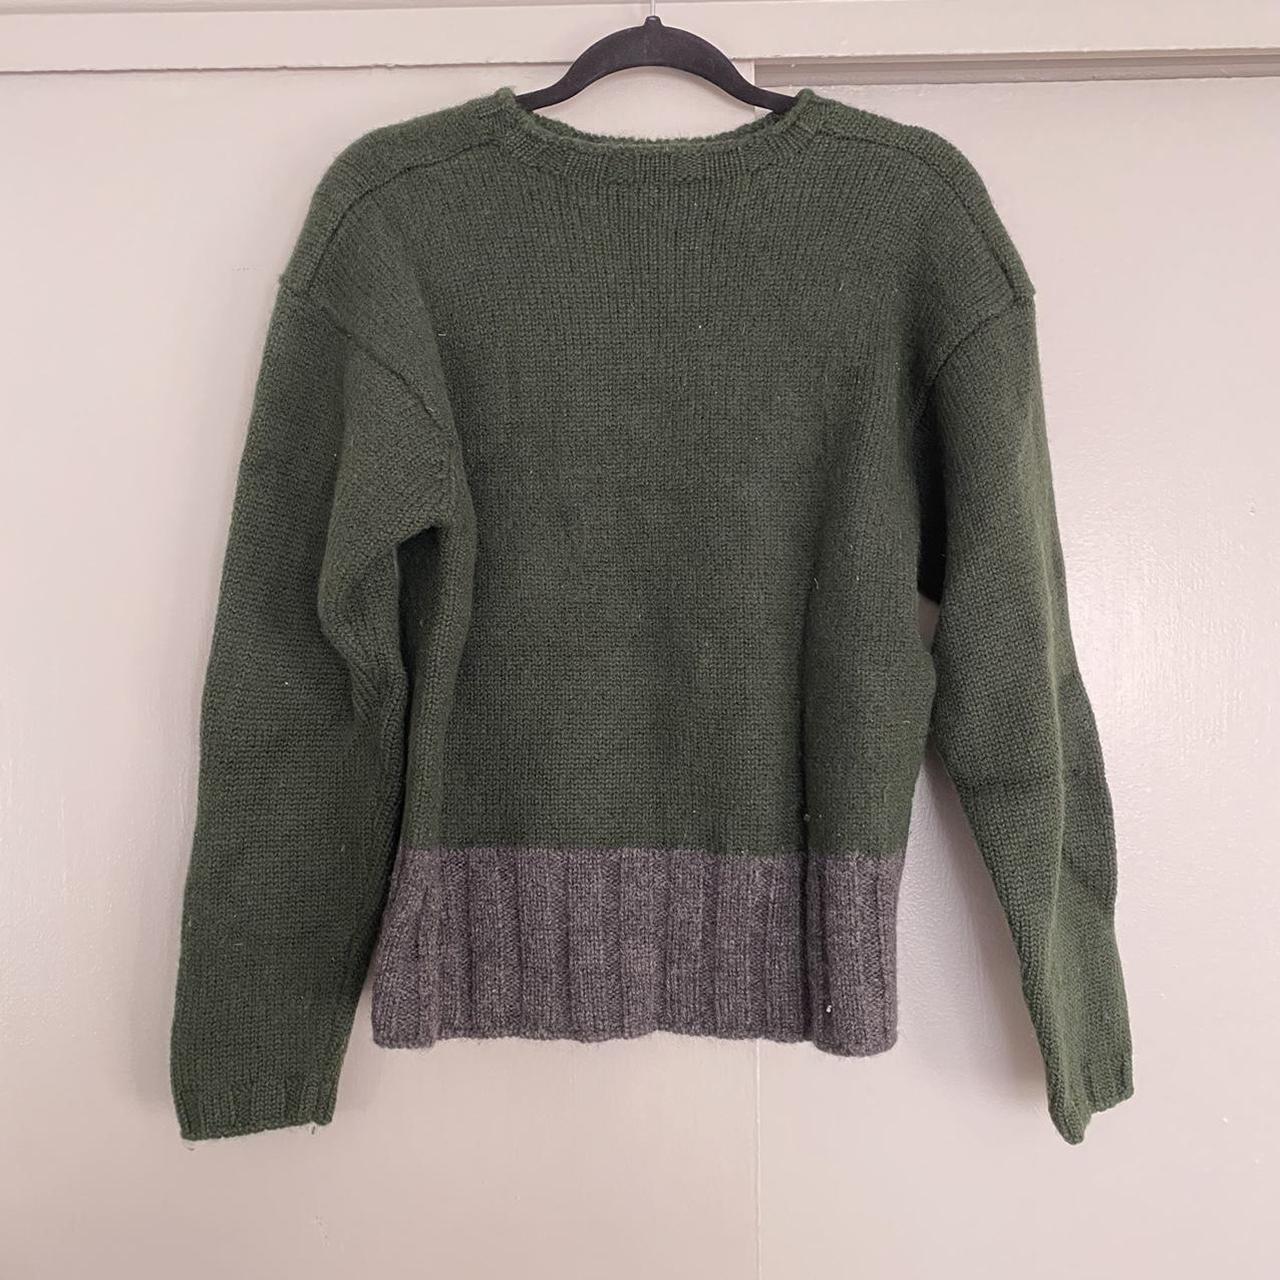 Vintage Wool J. Crew sweater in green and grey size... - Depop